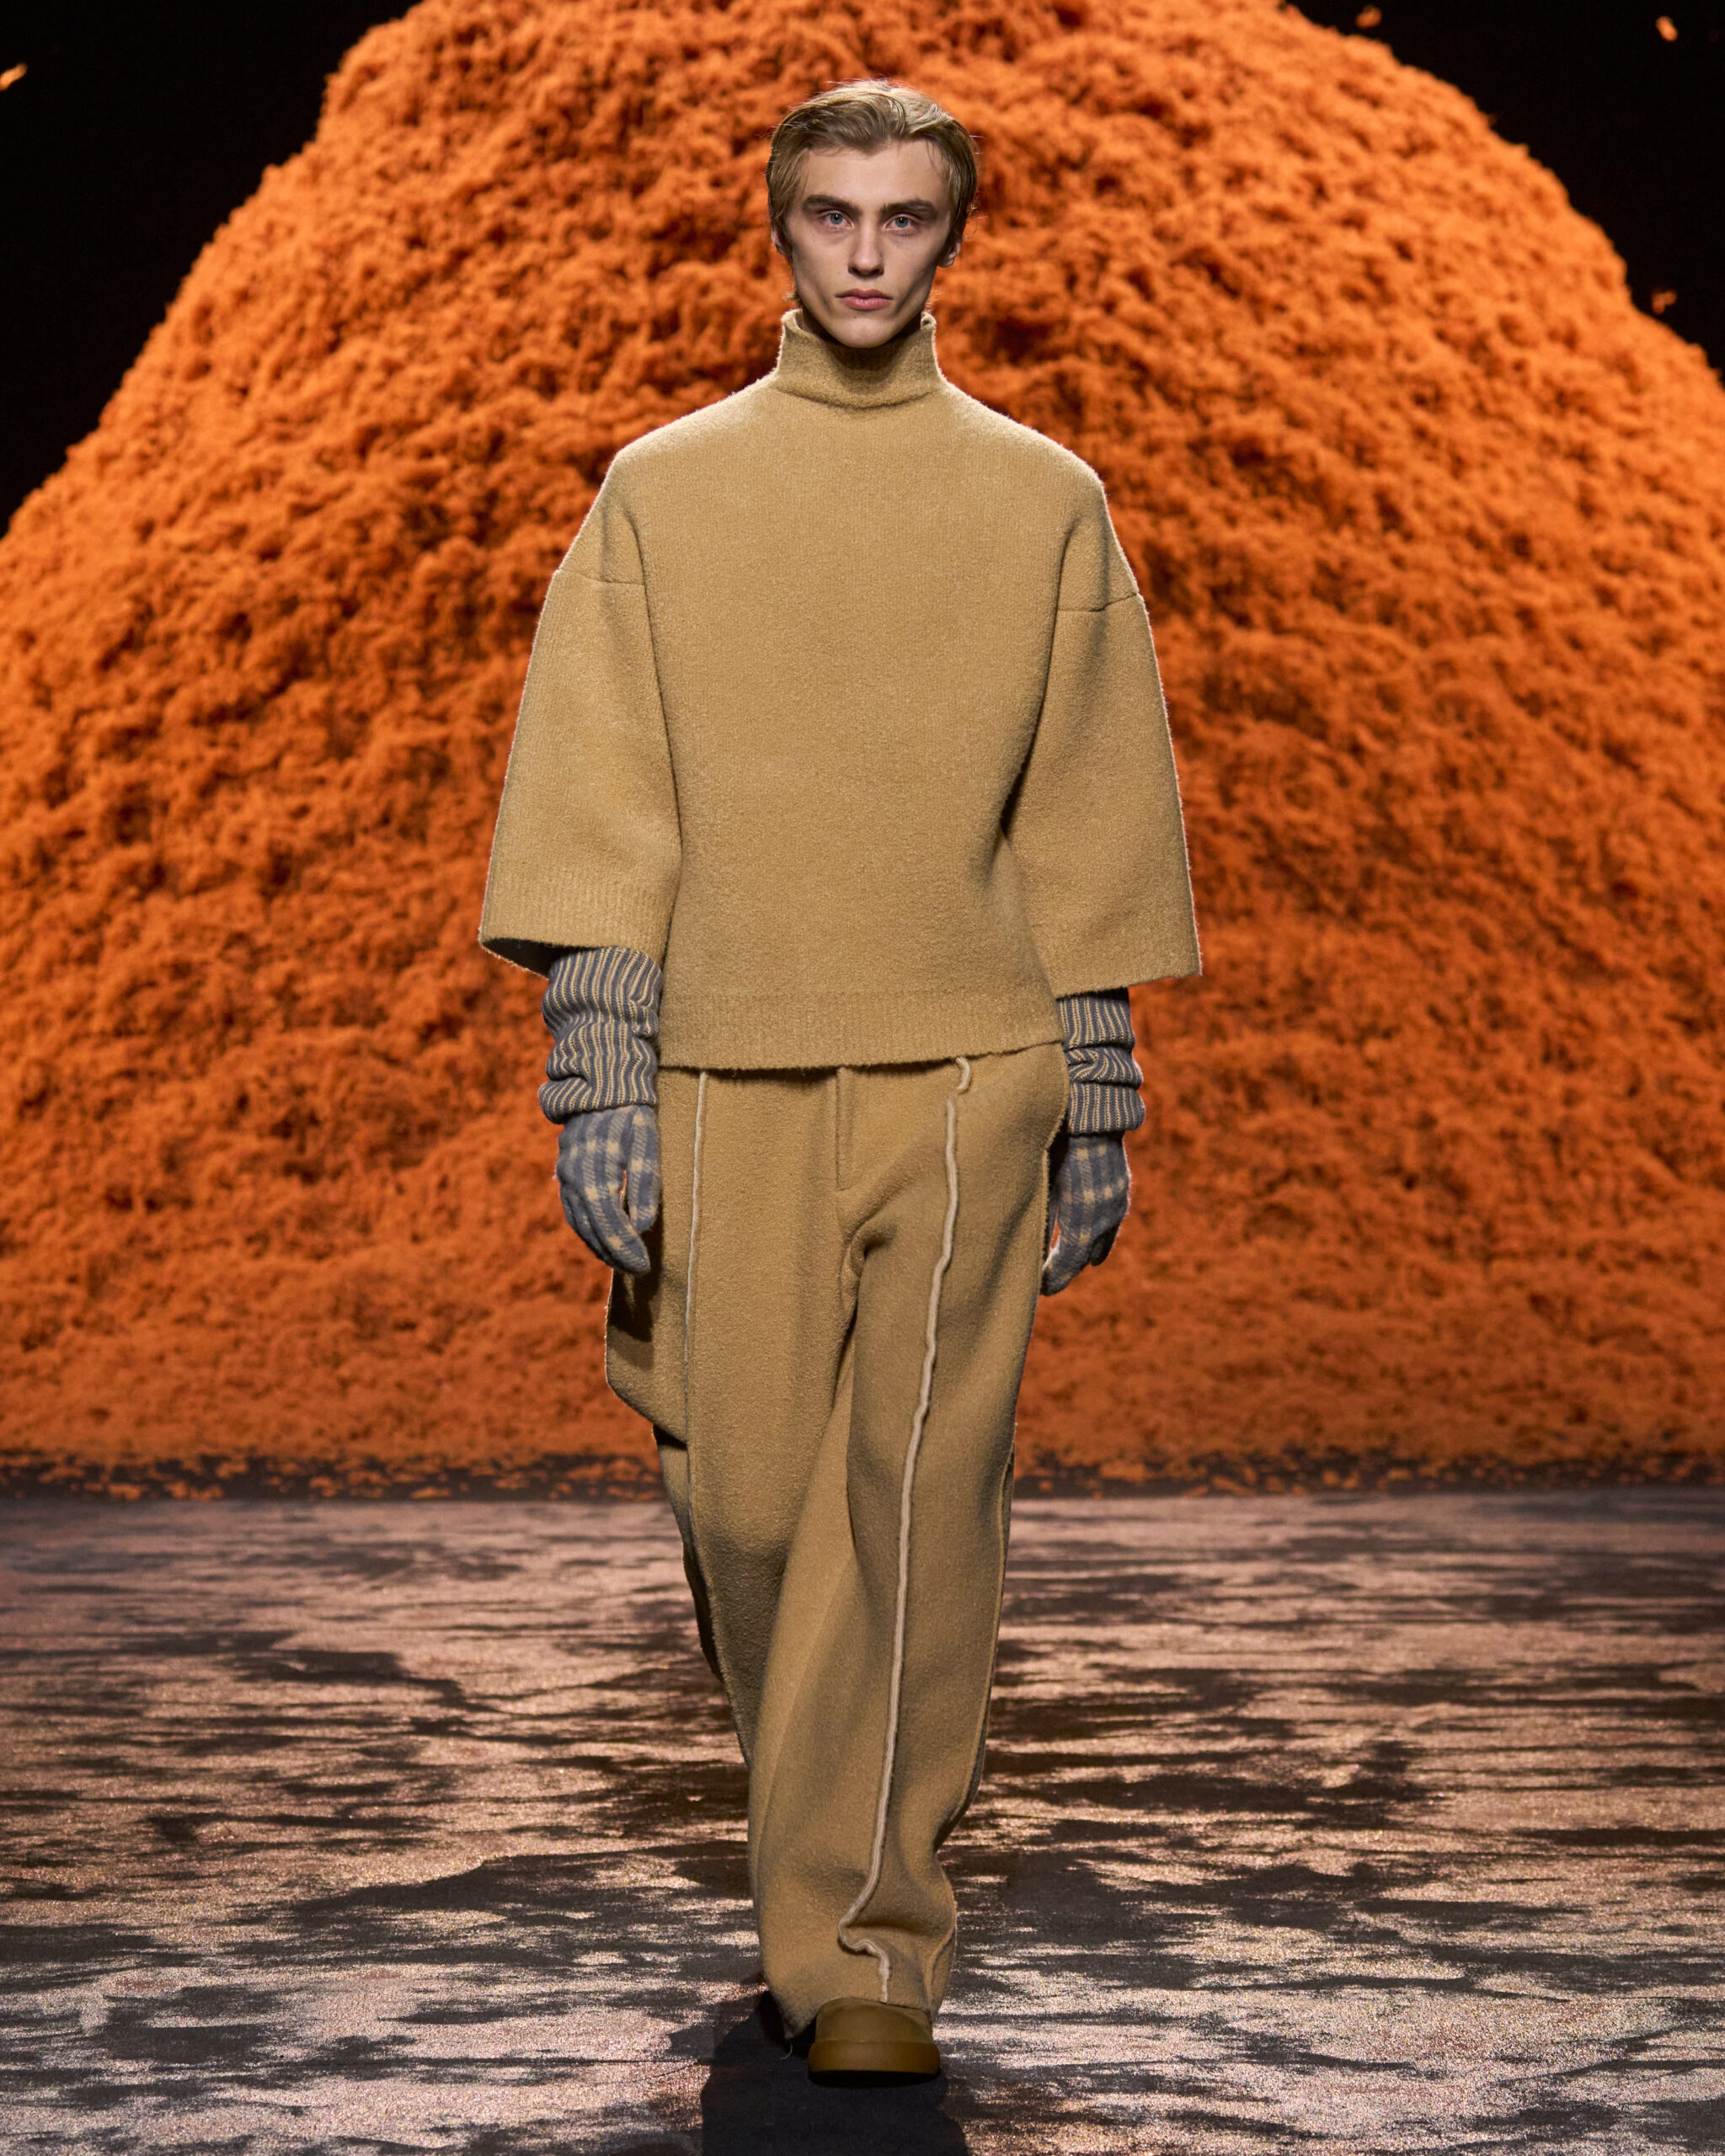 ZEGNA - In the Oasi of Cashmere